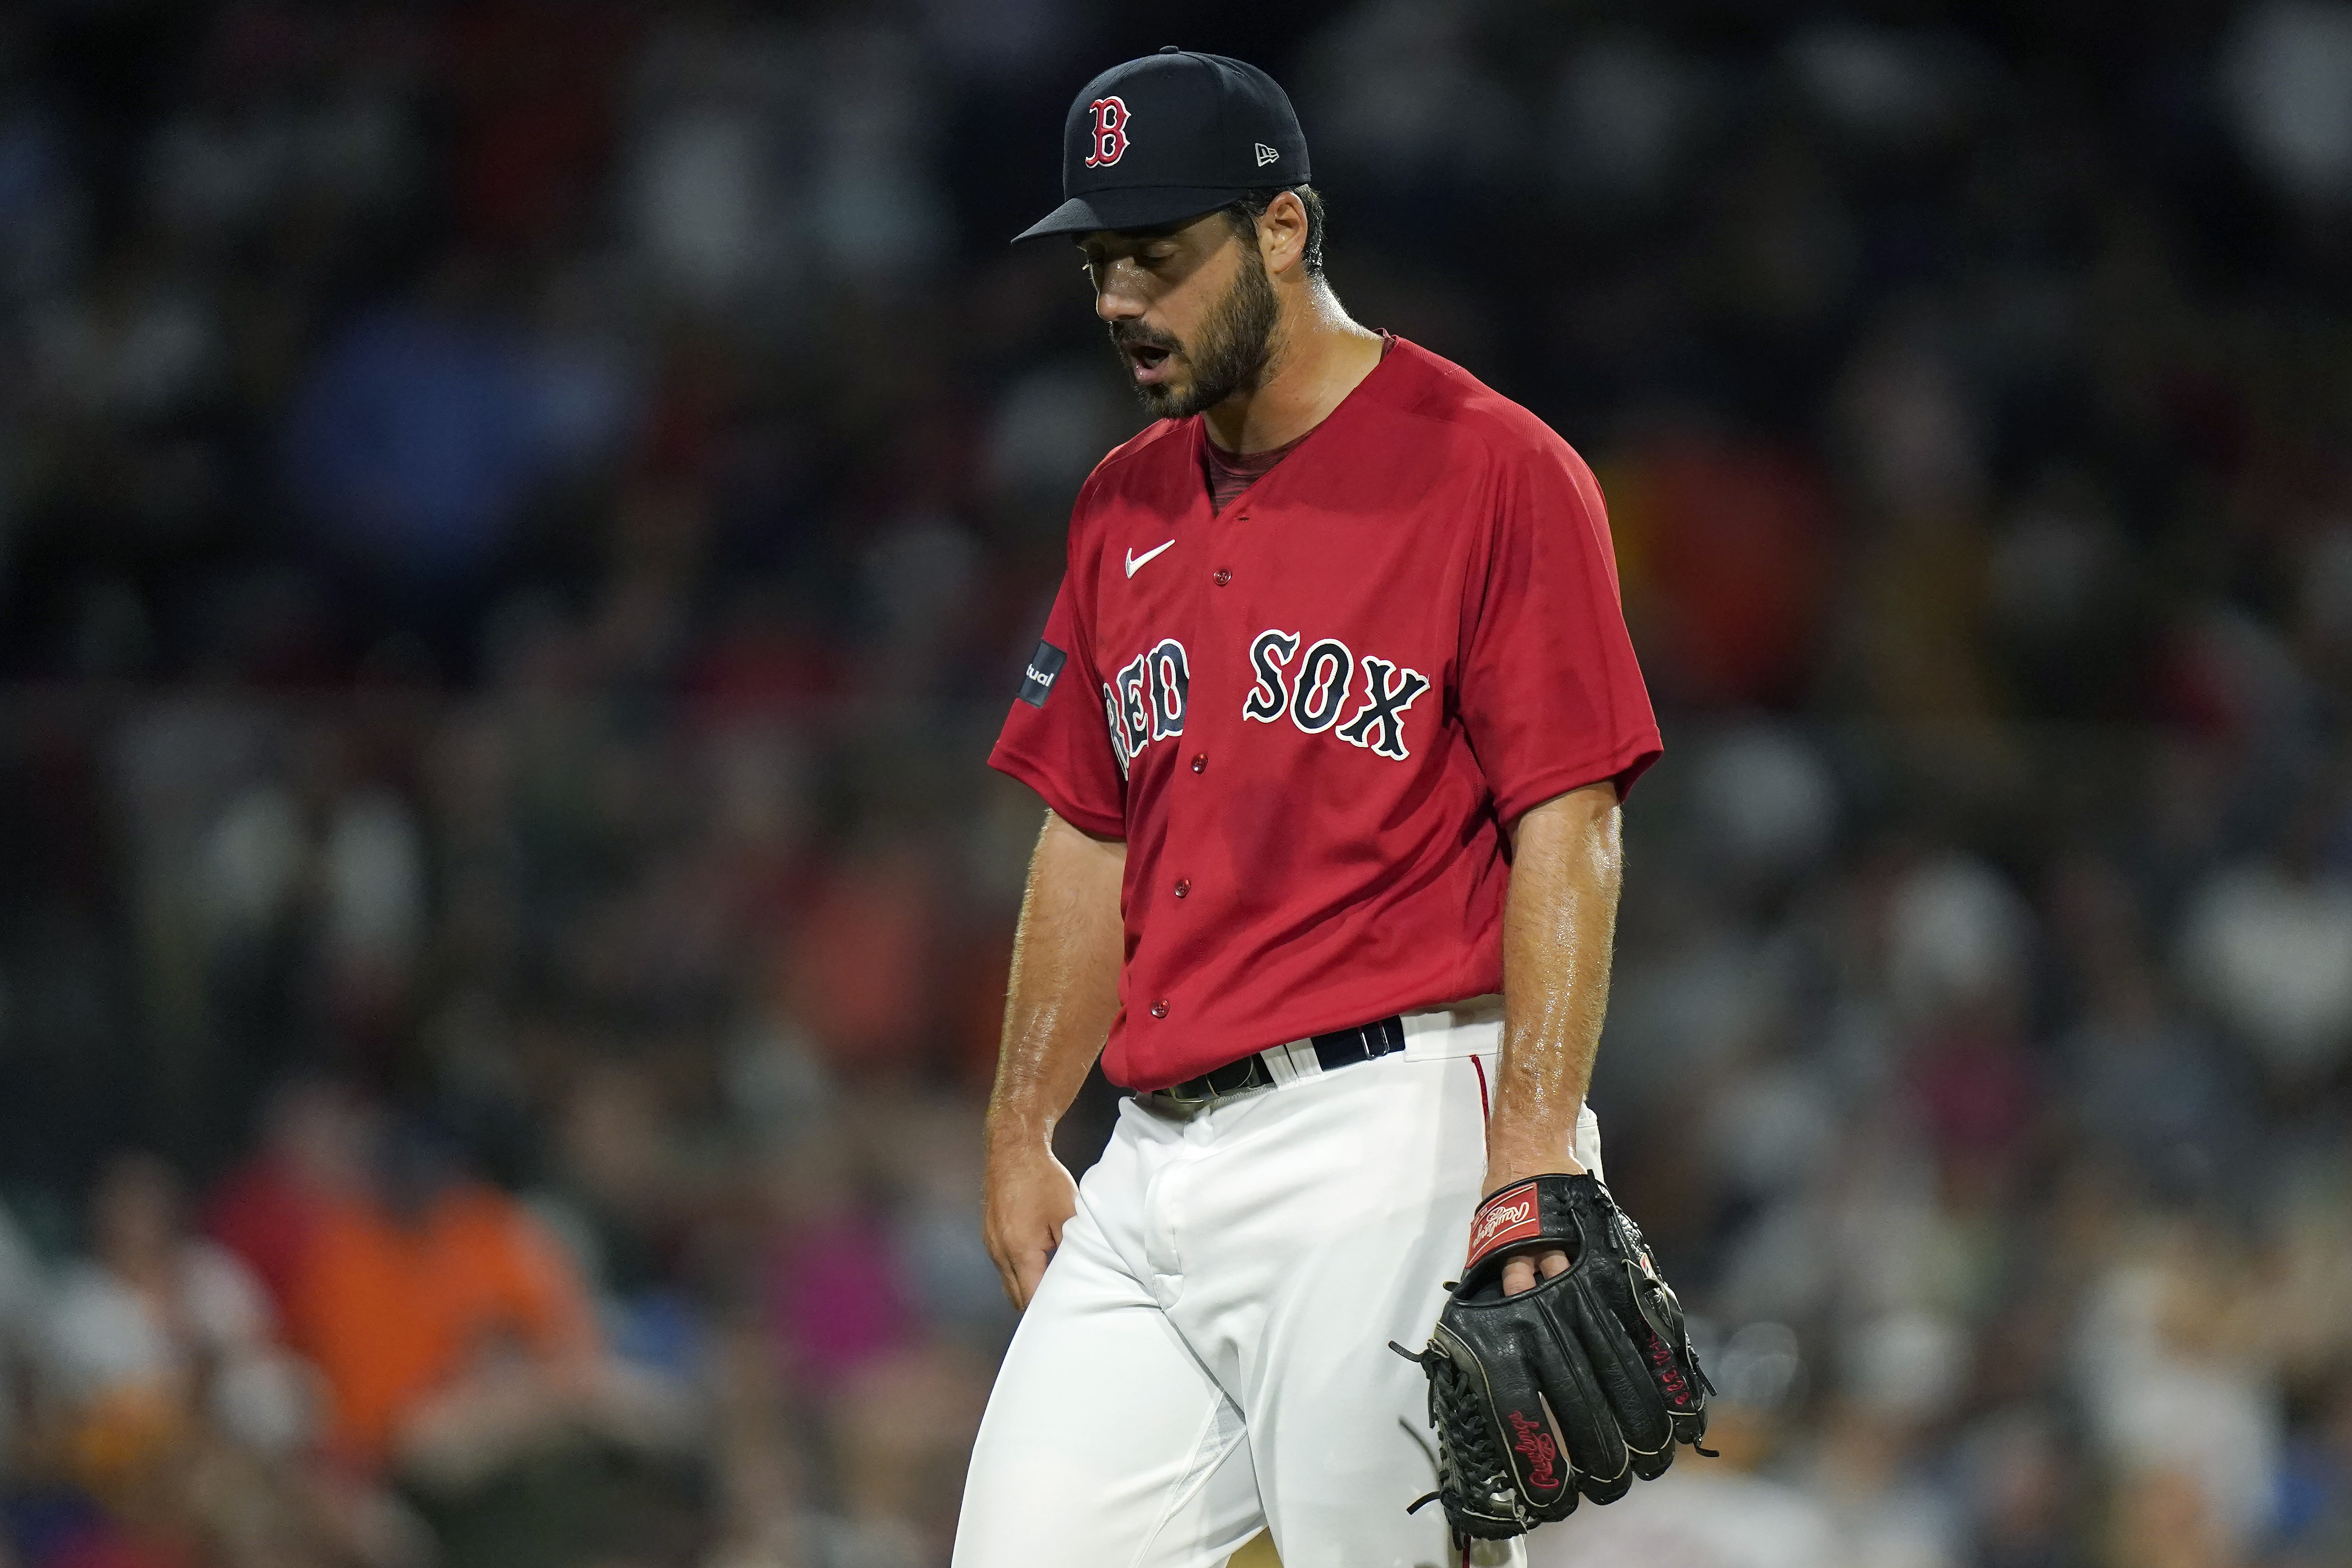 Peter Abraham: The Red Sox' playoff hopes are fading fast